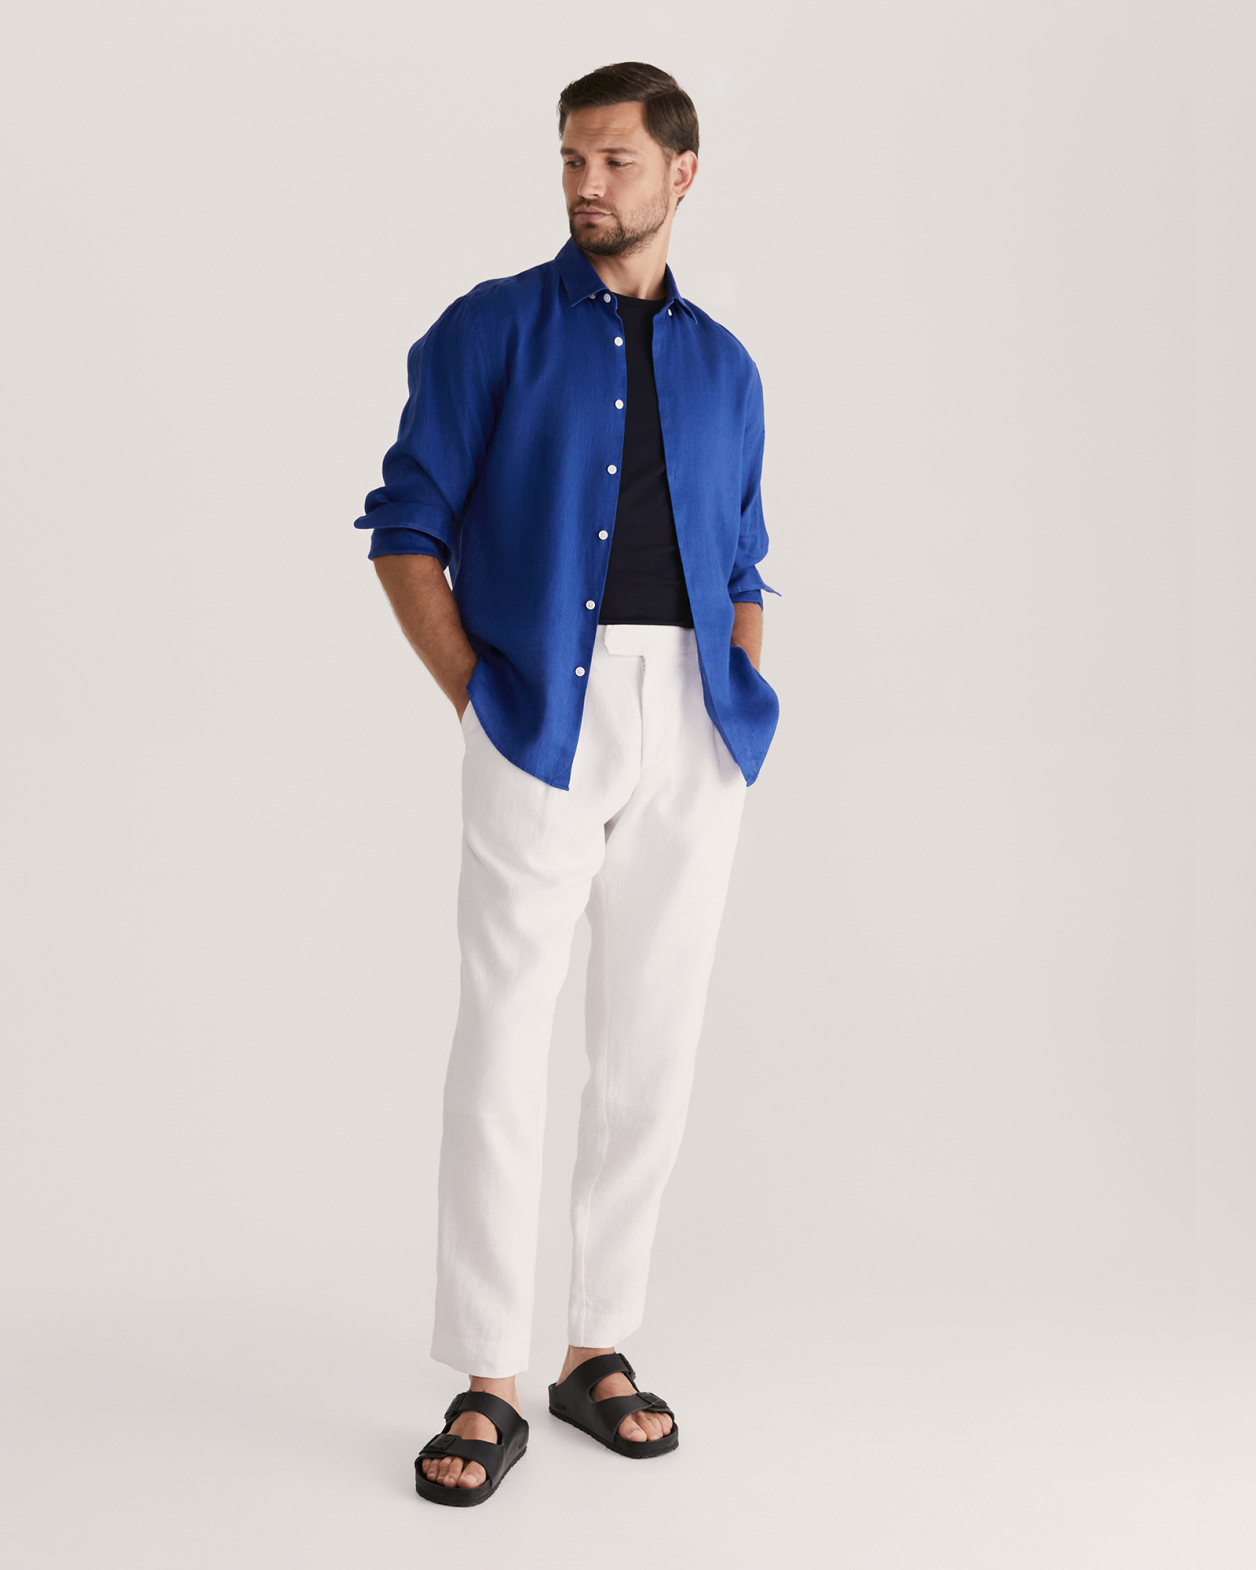 Anderson Long Sleeve Classic Linen Shirt in BLUE